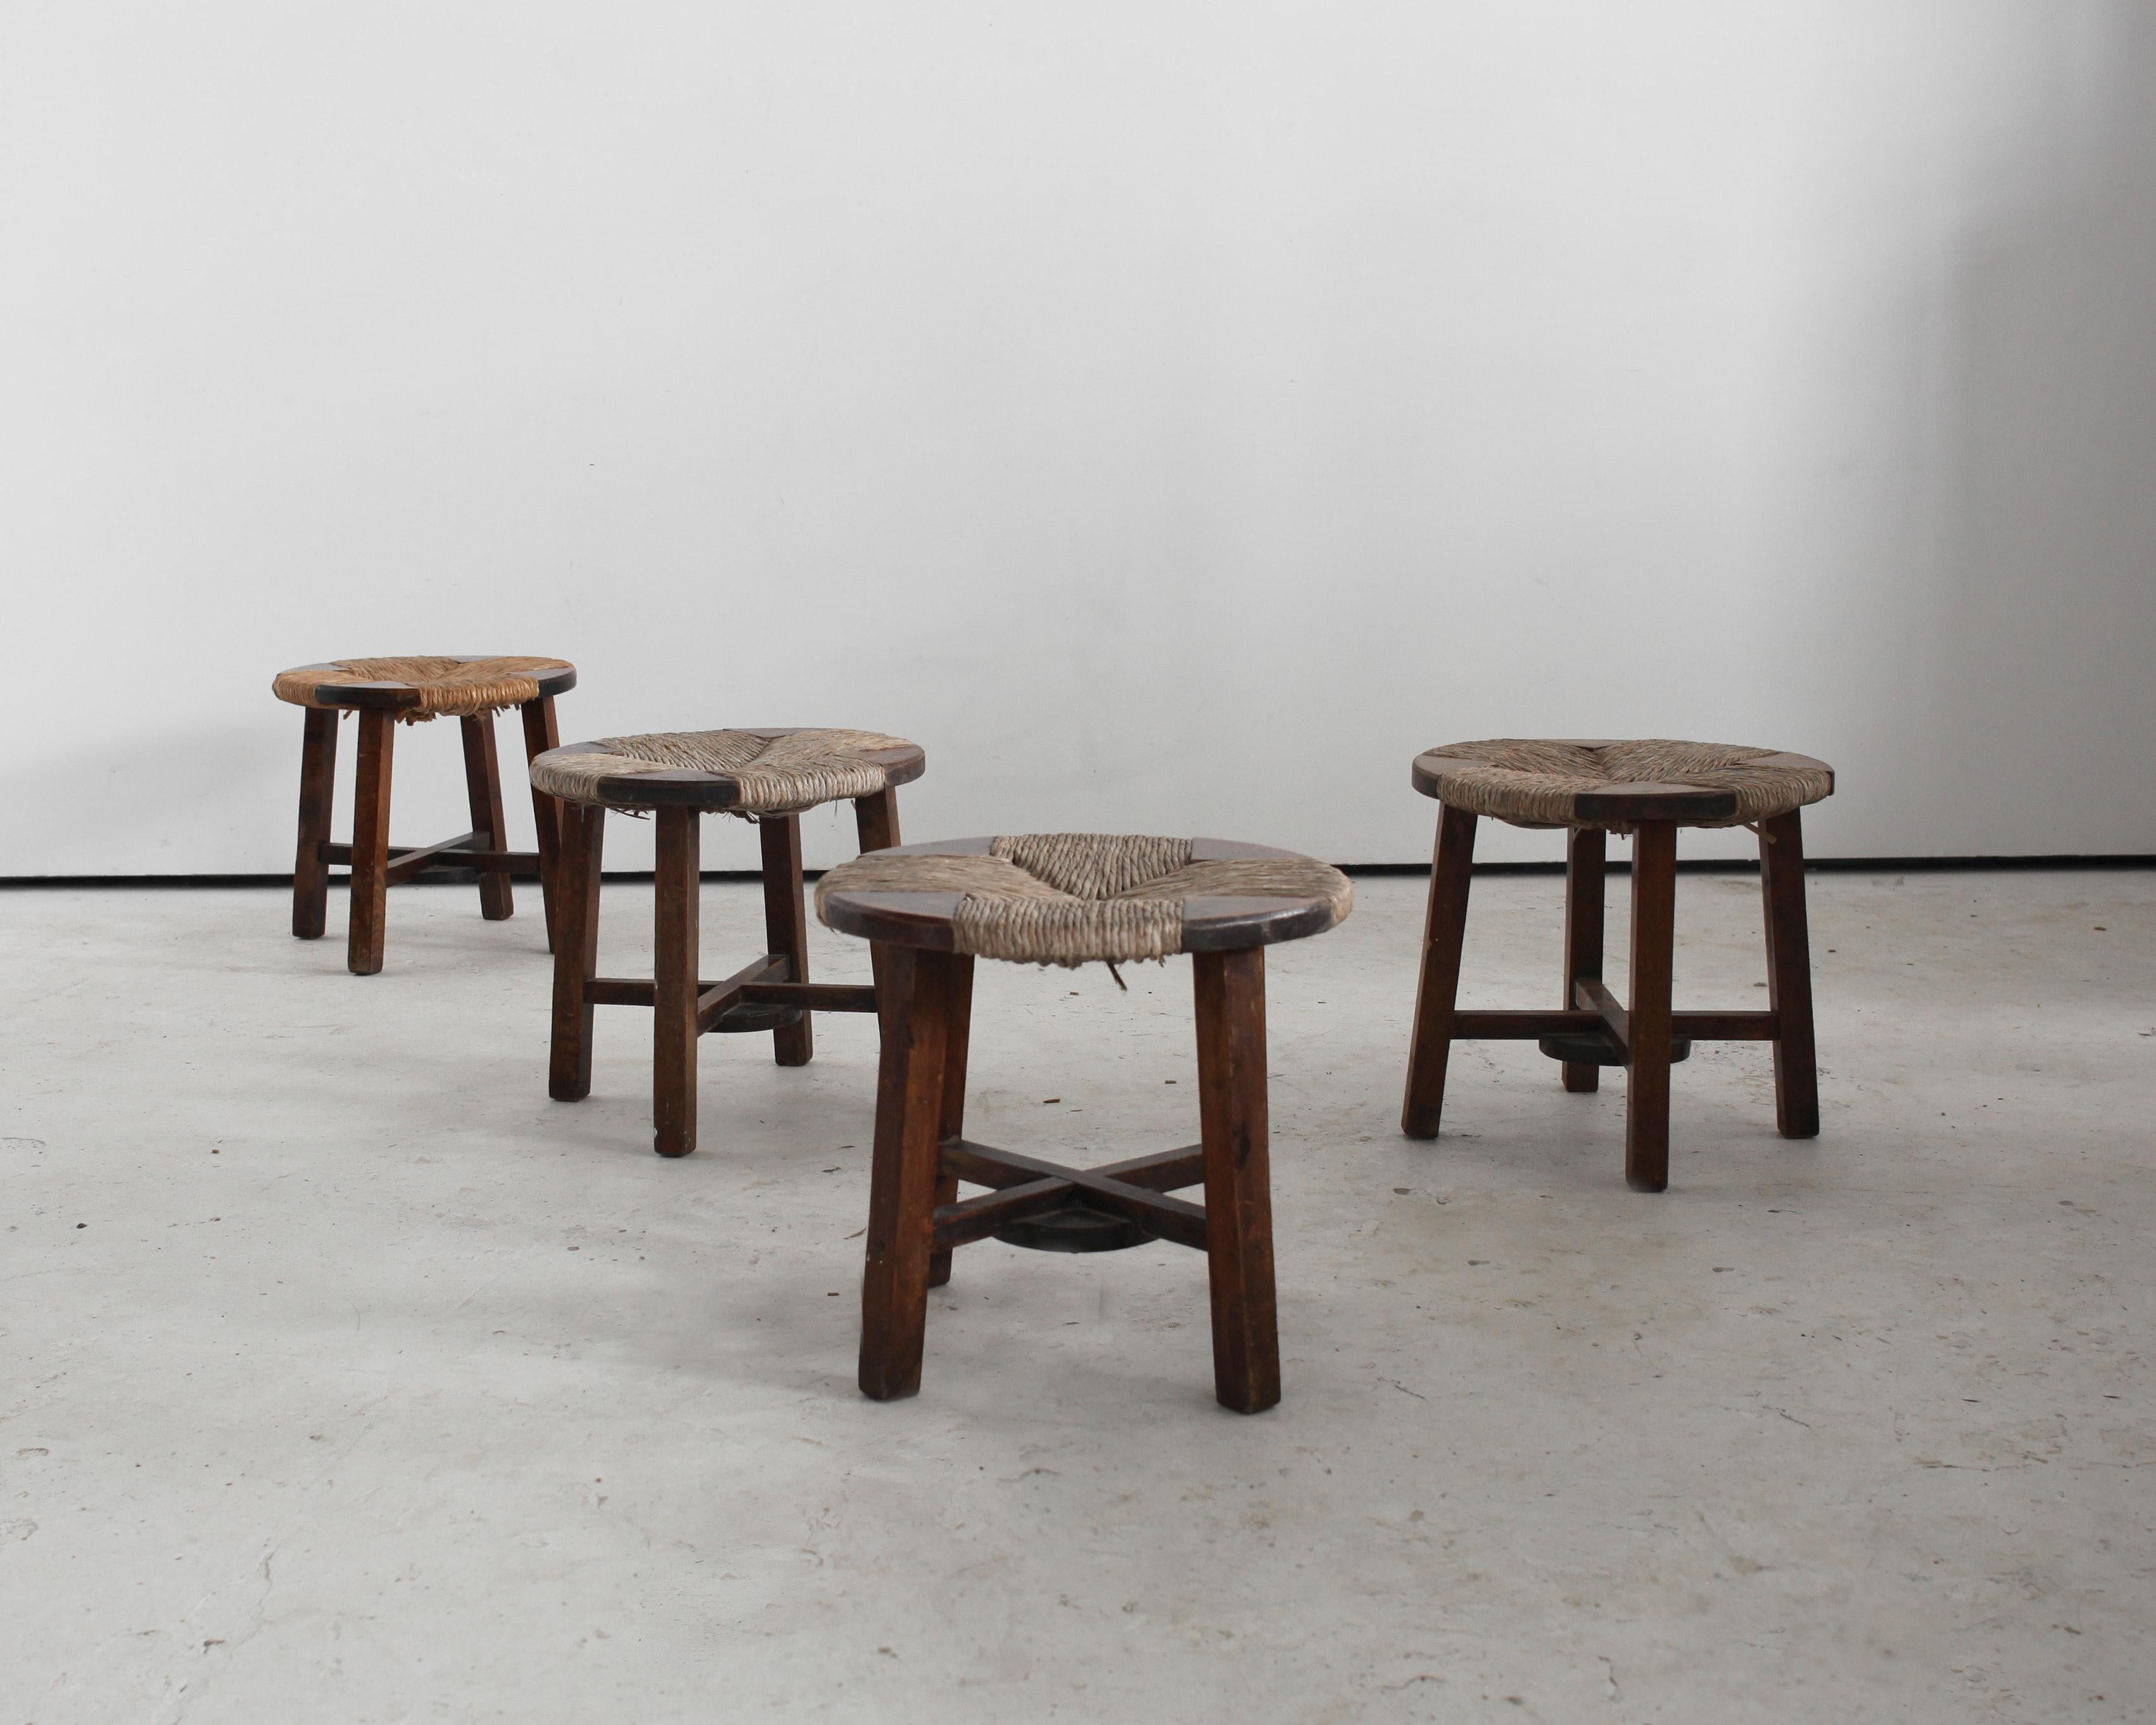 A set of four C.1950s French modernist stools bought in the Loire valley.

Very much in the style of Charlotte Perriand.

In good original condition.